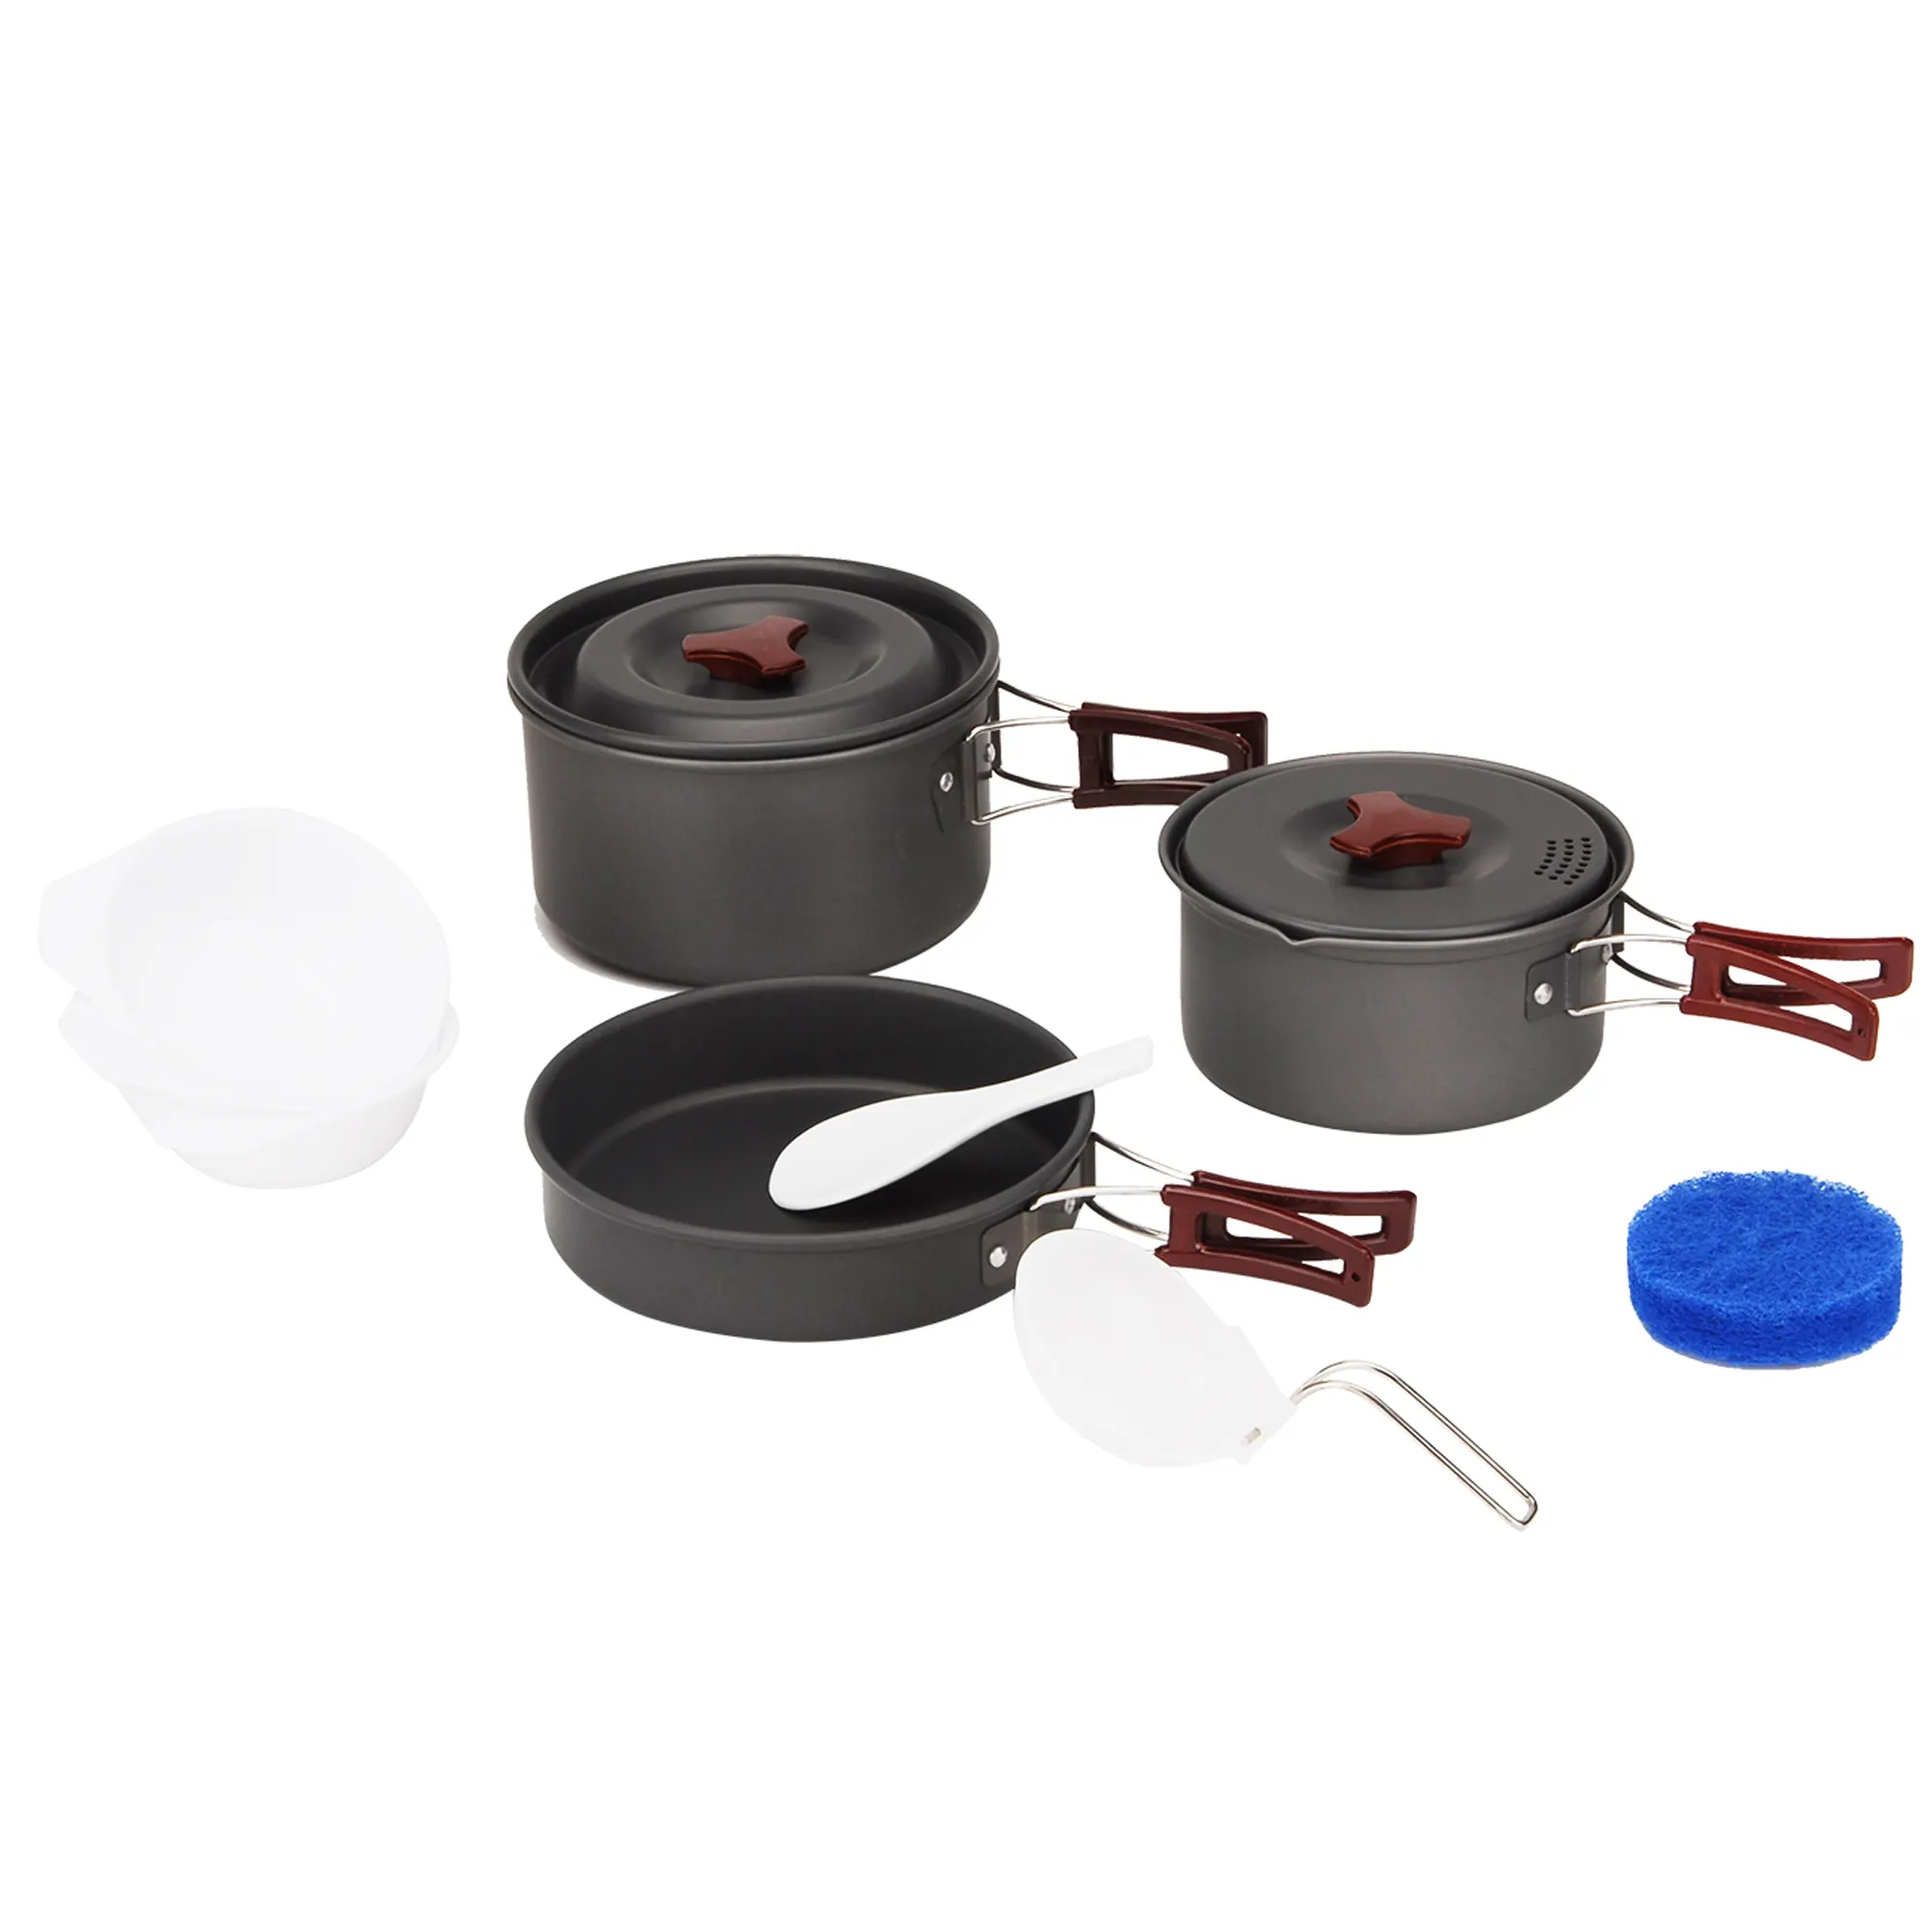 Foldable Camping Aluminum Cookset Hiking Cookware Multi Pots for Camping